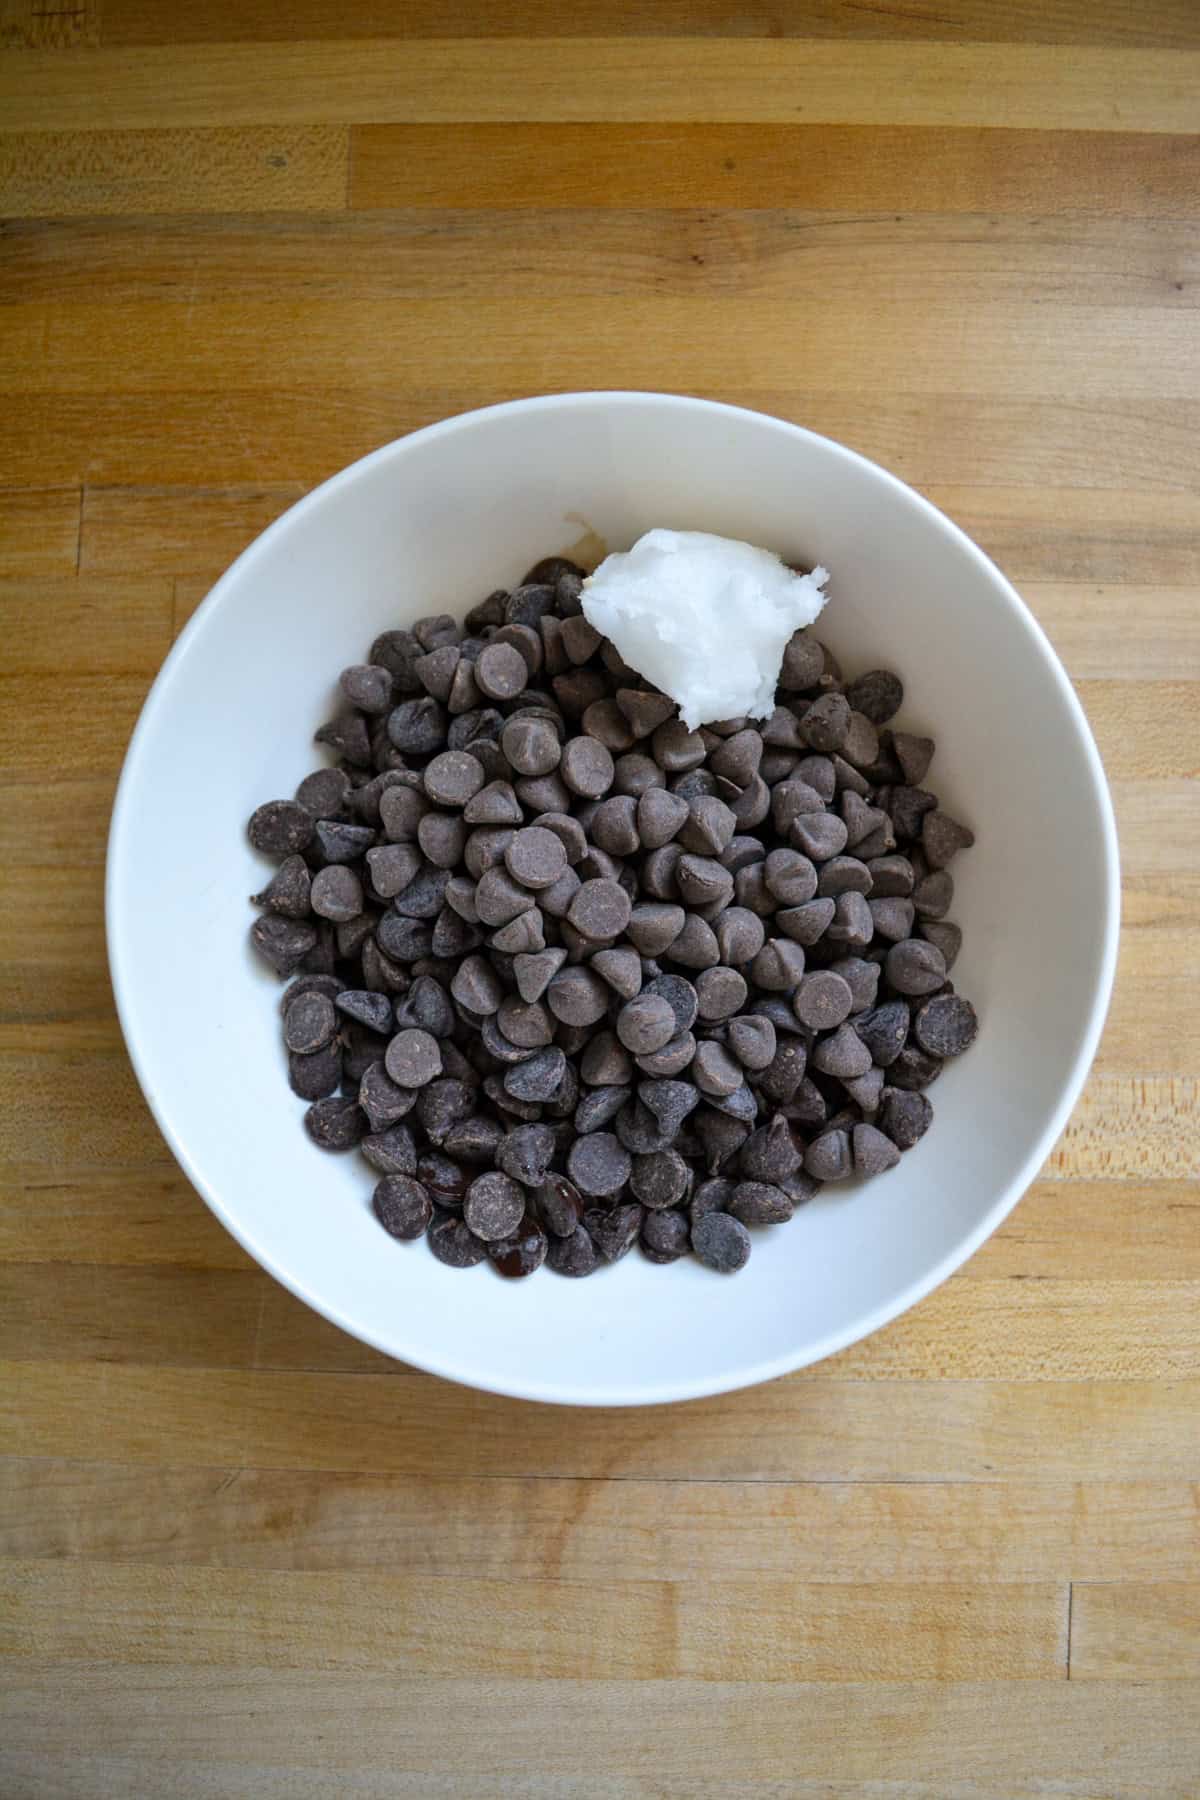 Chocolate chips and coconut oil in a bowl on a wooden surface.